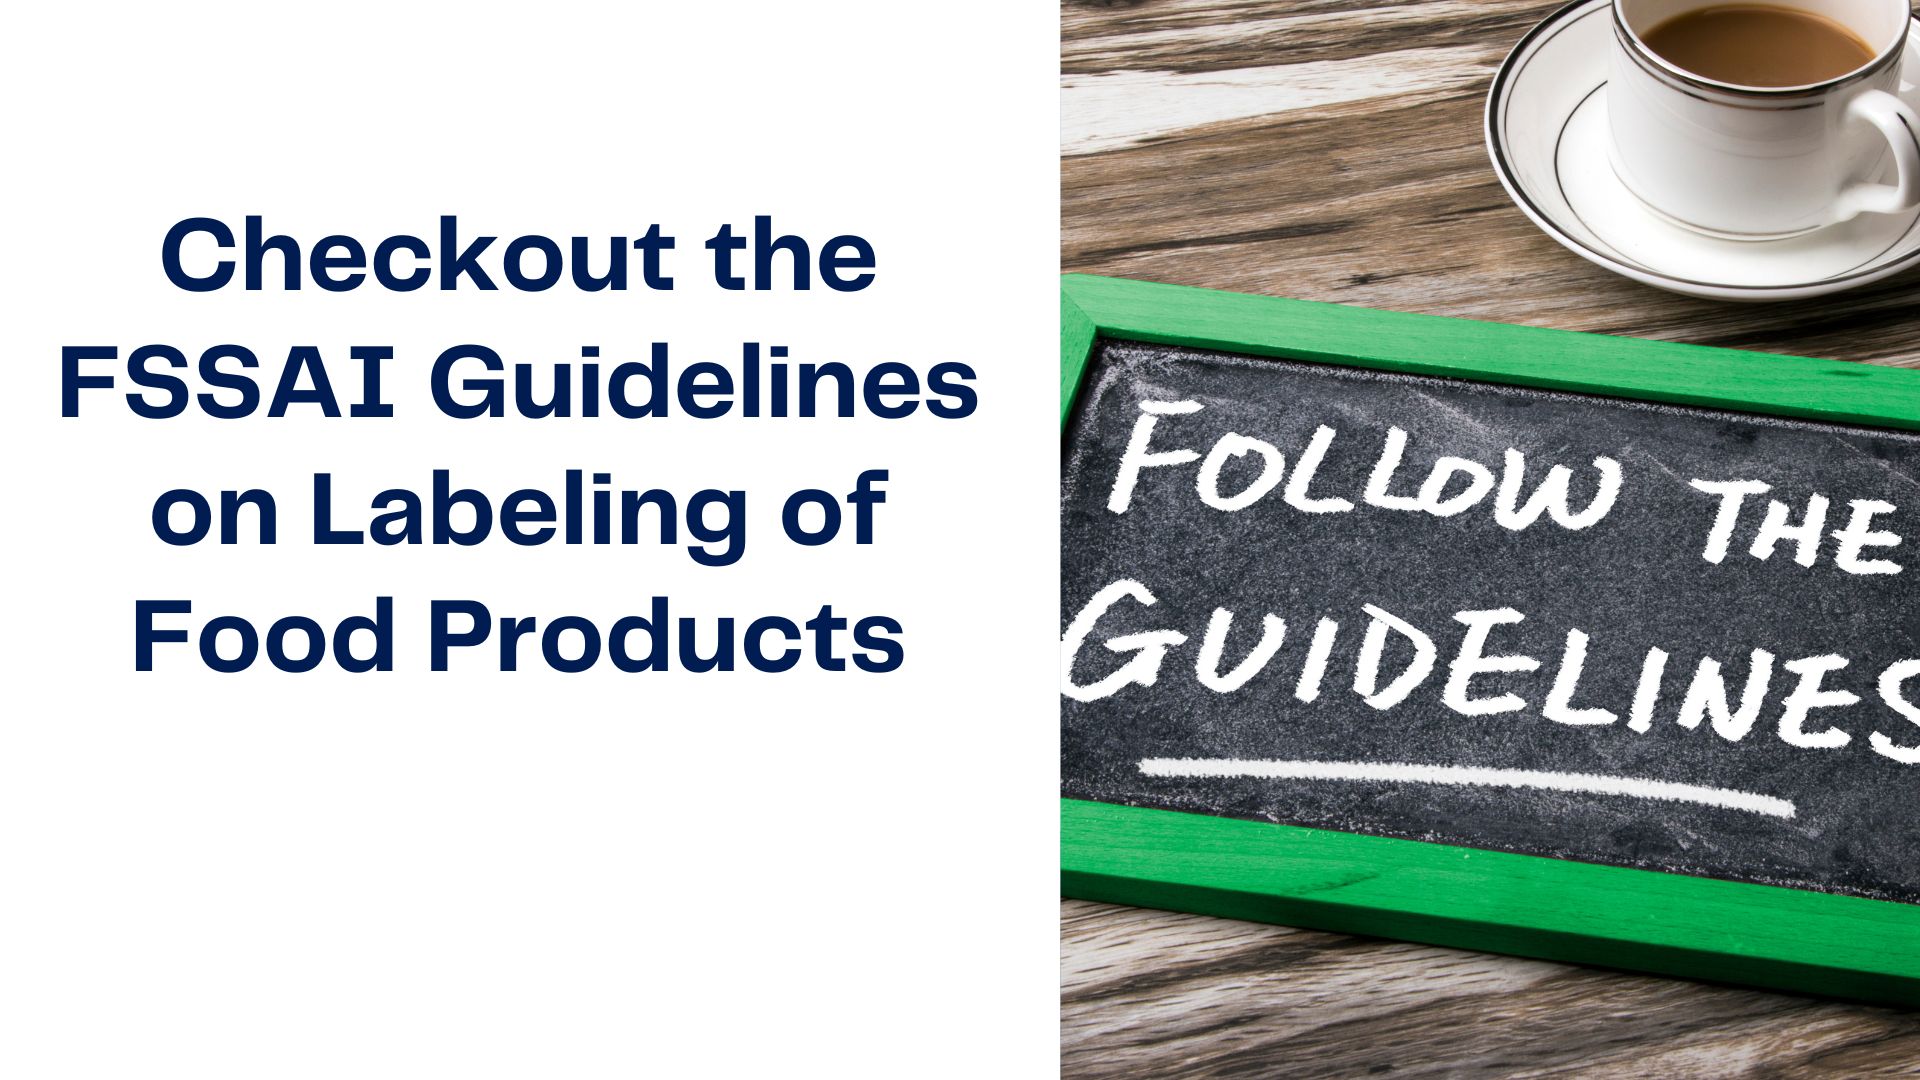 Checkout the FSSAI Guidelines on Labeling of Food Products